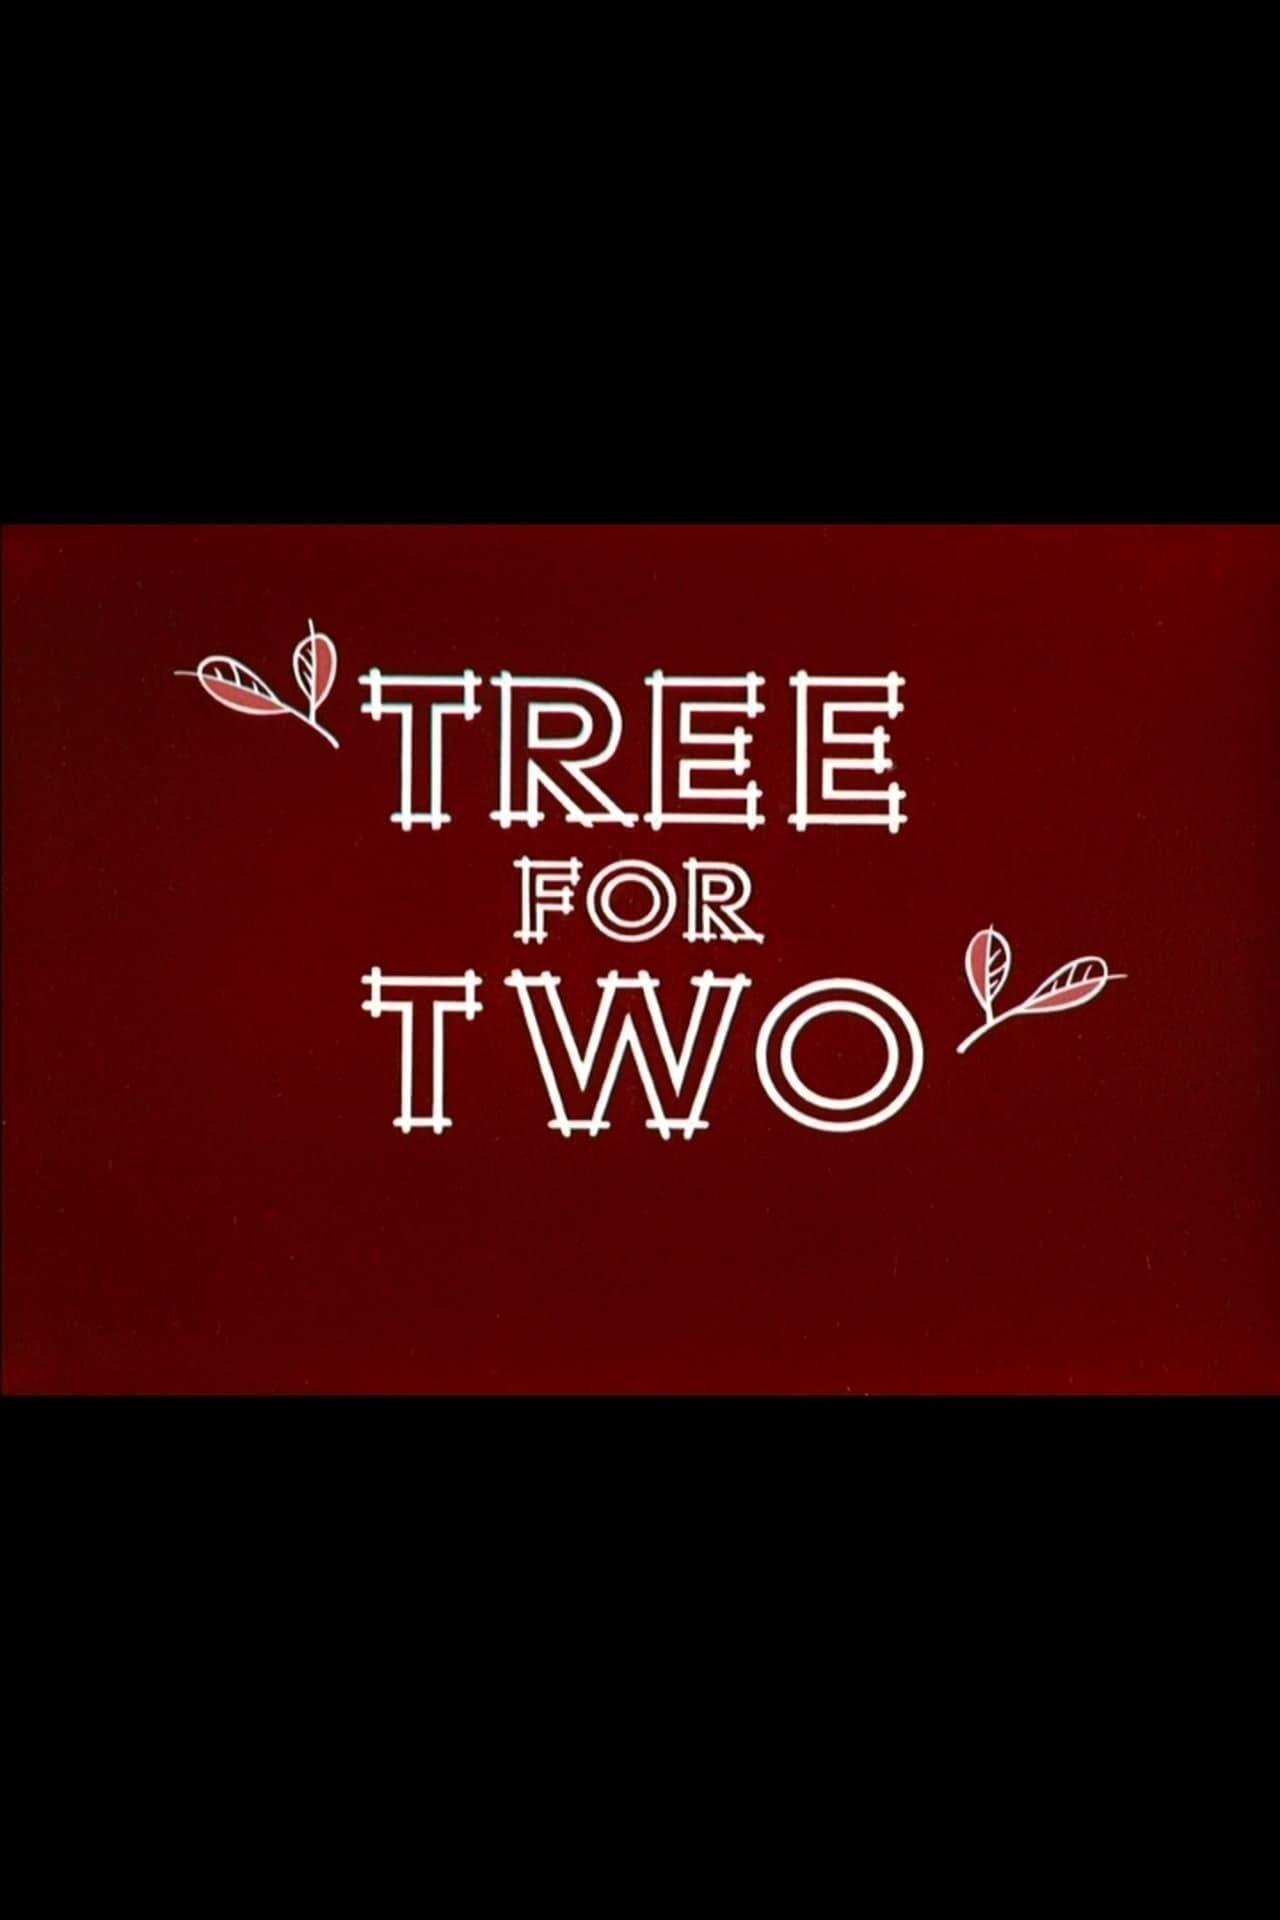 Tree for Two poster